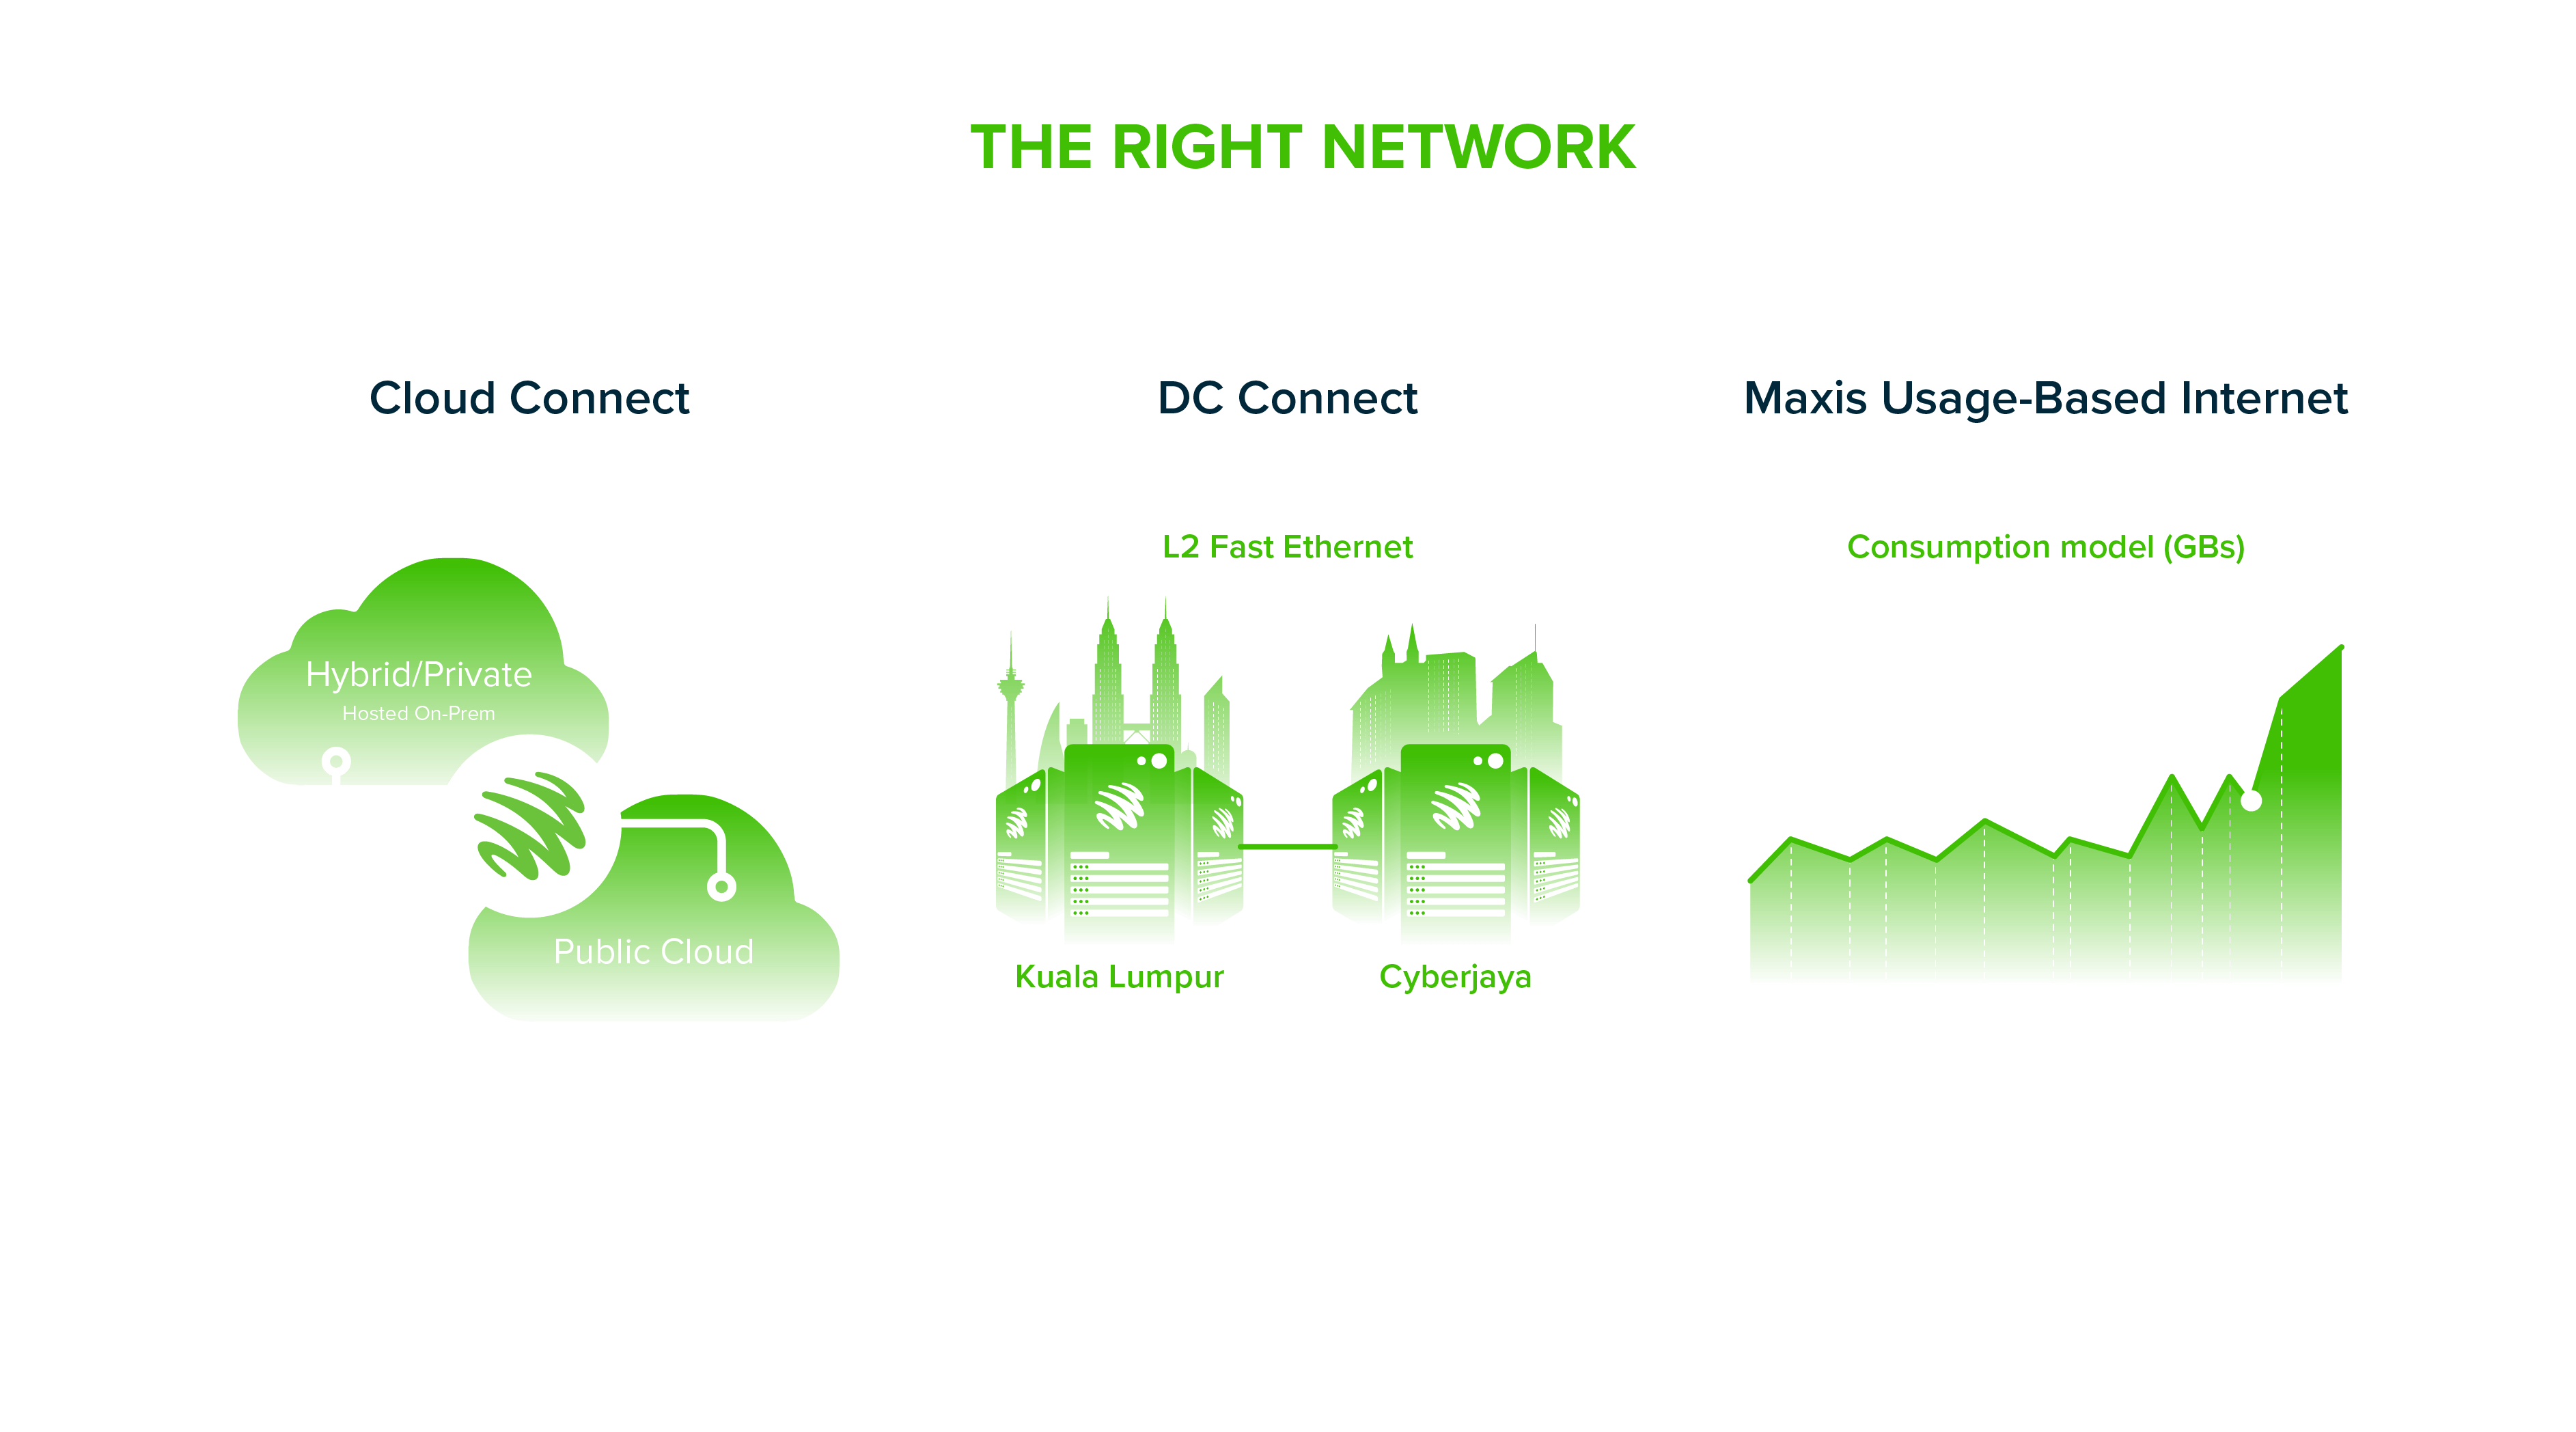 The Right Network